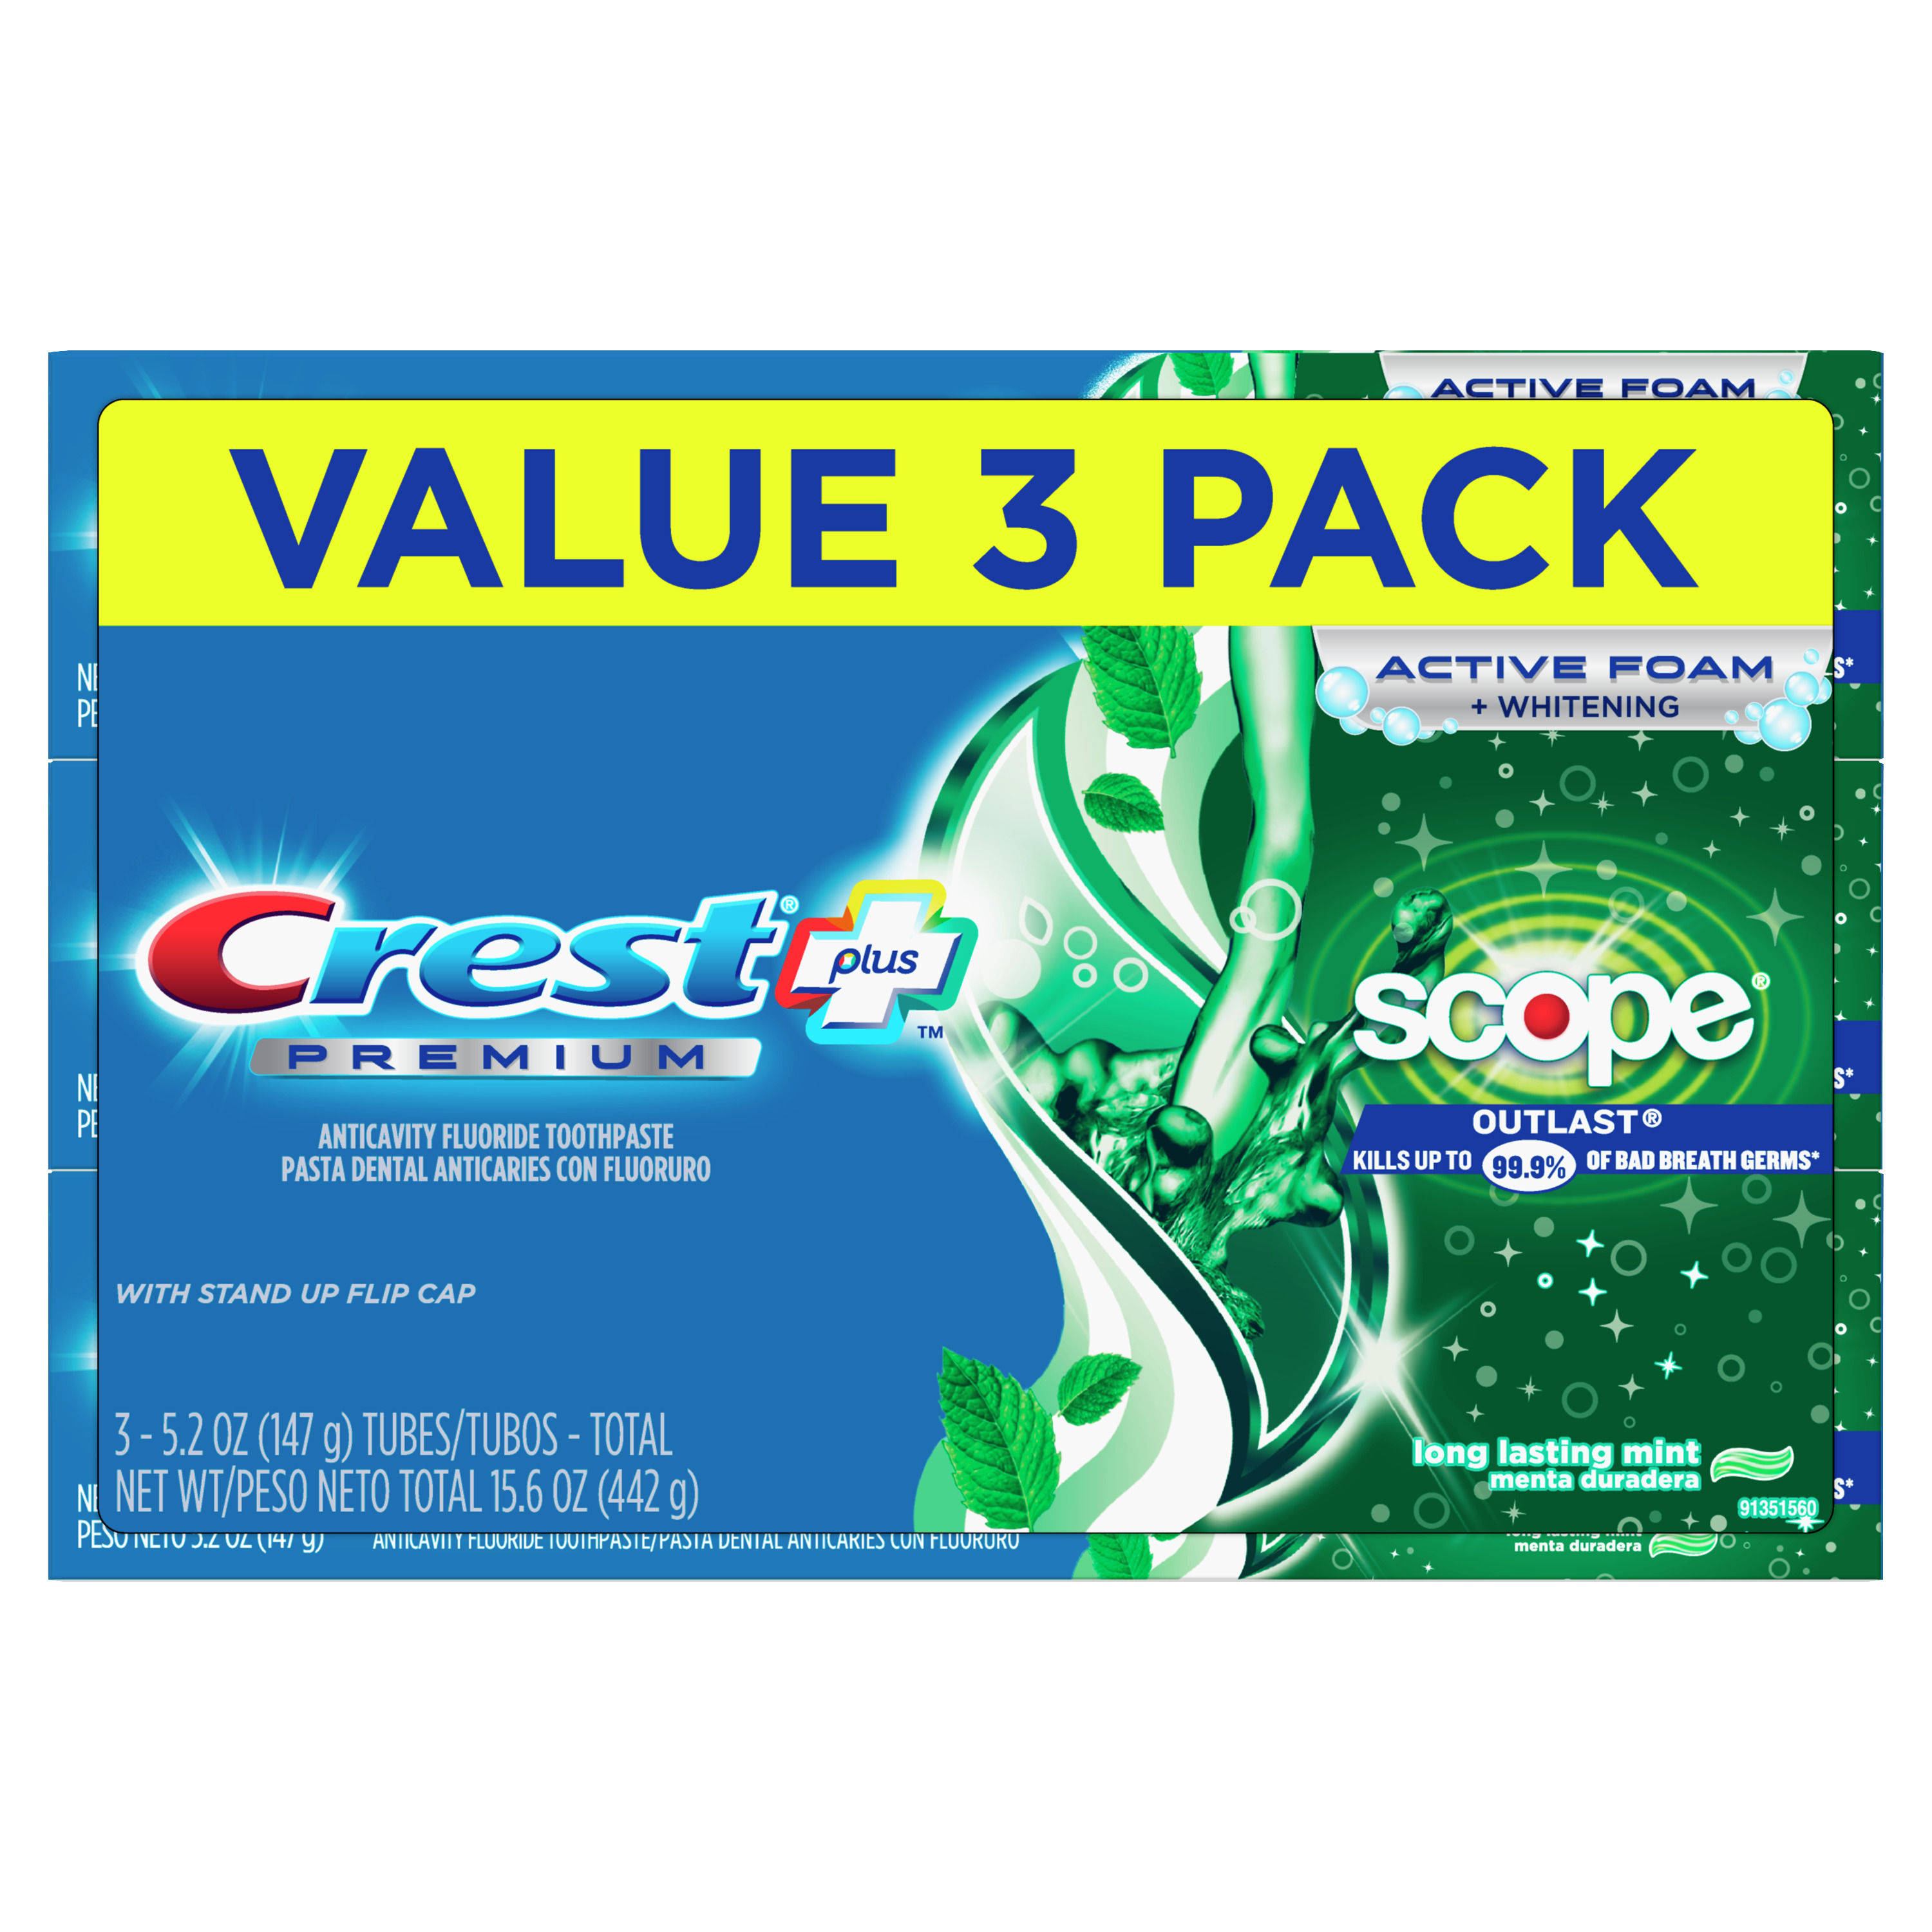 Crest Premium Plus Scope Outlast Toothpaste, Long Lasting Mint Flavor 5.2 oz, Pack of 3 - image 1 of 11